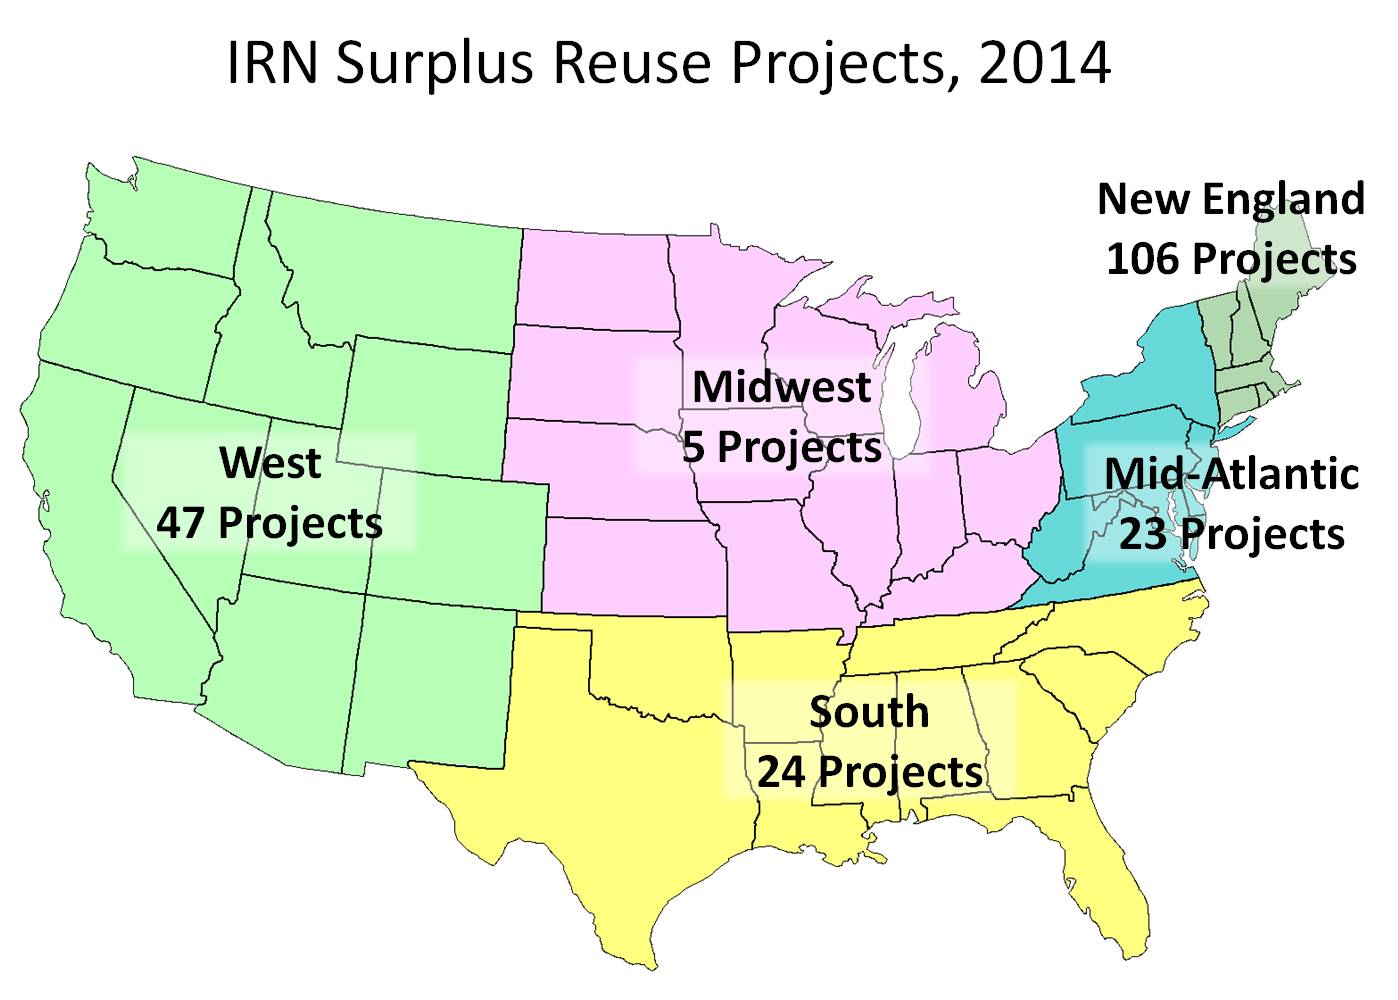 Projects by Region 2014